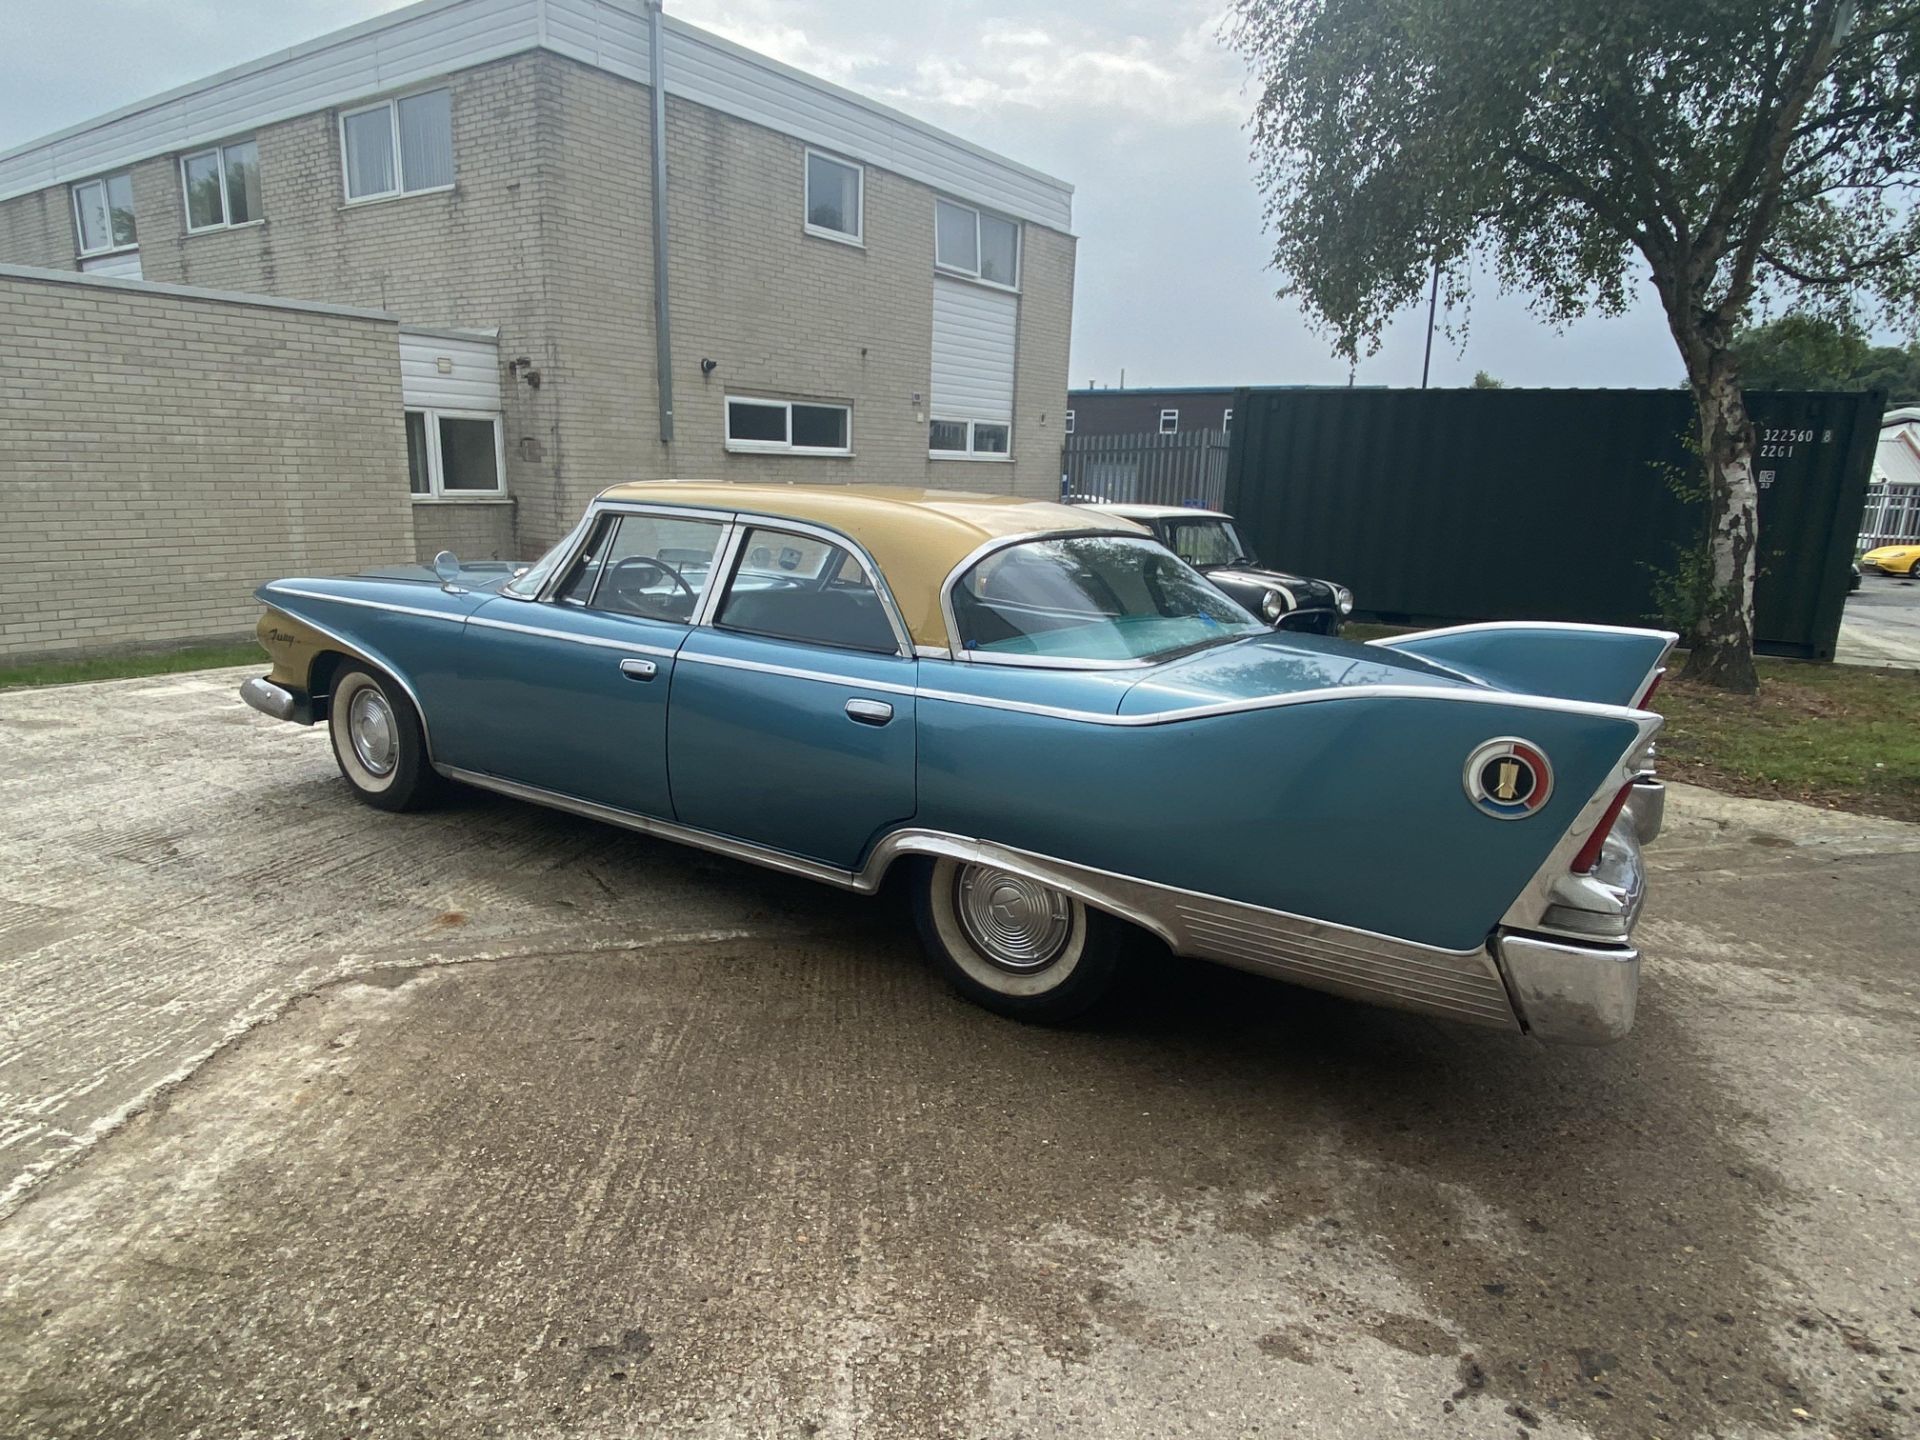 Plymouth Fury - Image 8 of 41